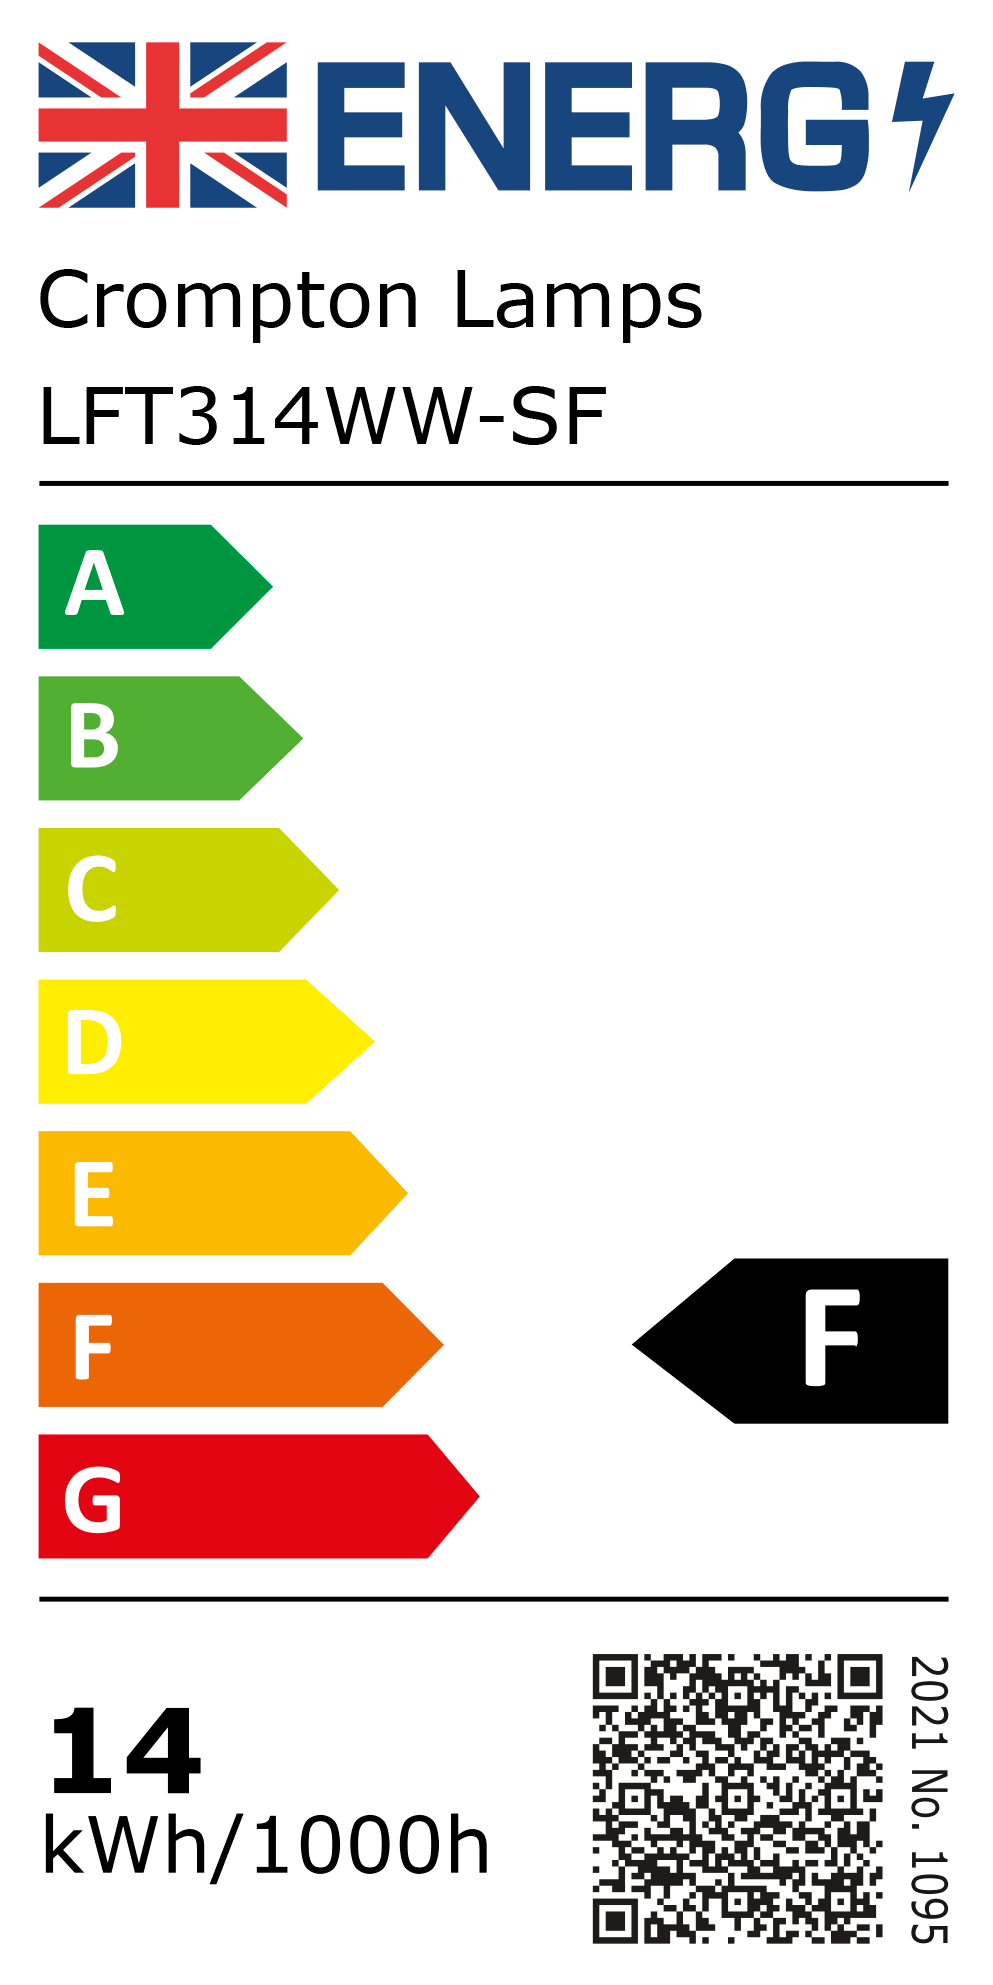 New 2021 Energy Rating Label: Stock Code LFT314WW-SF